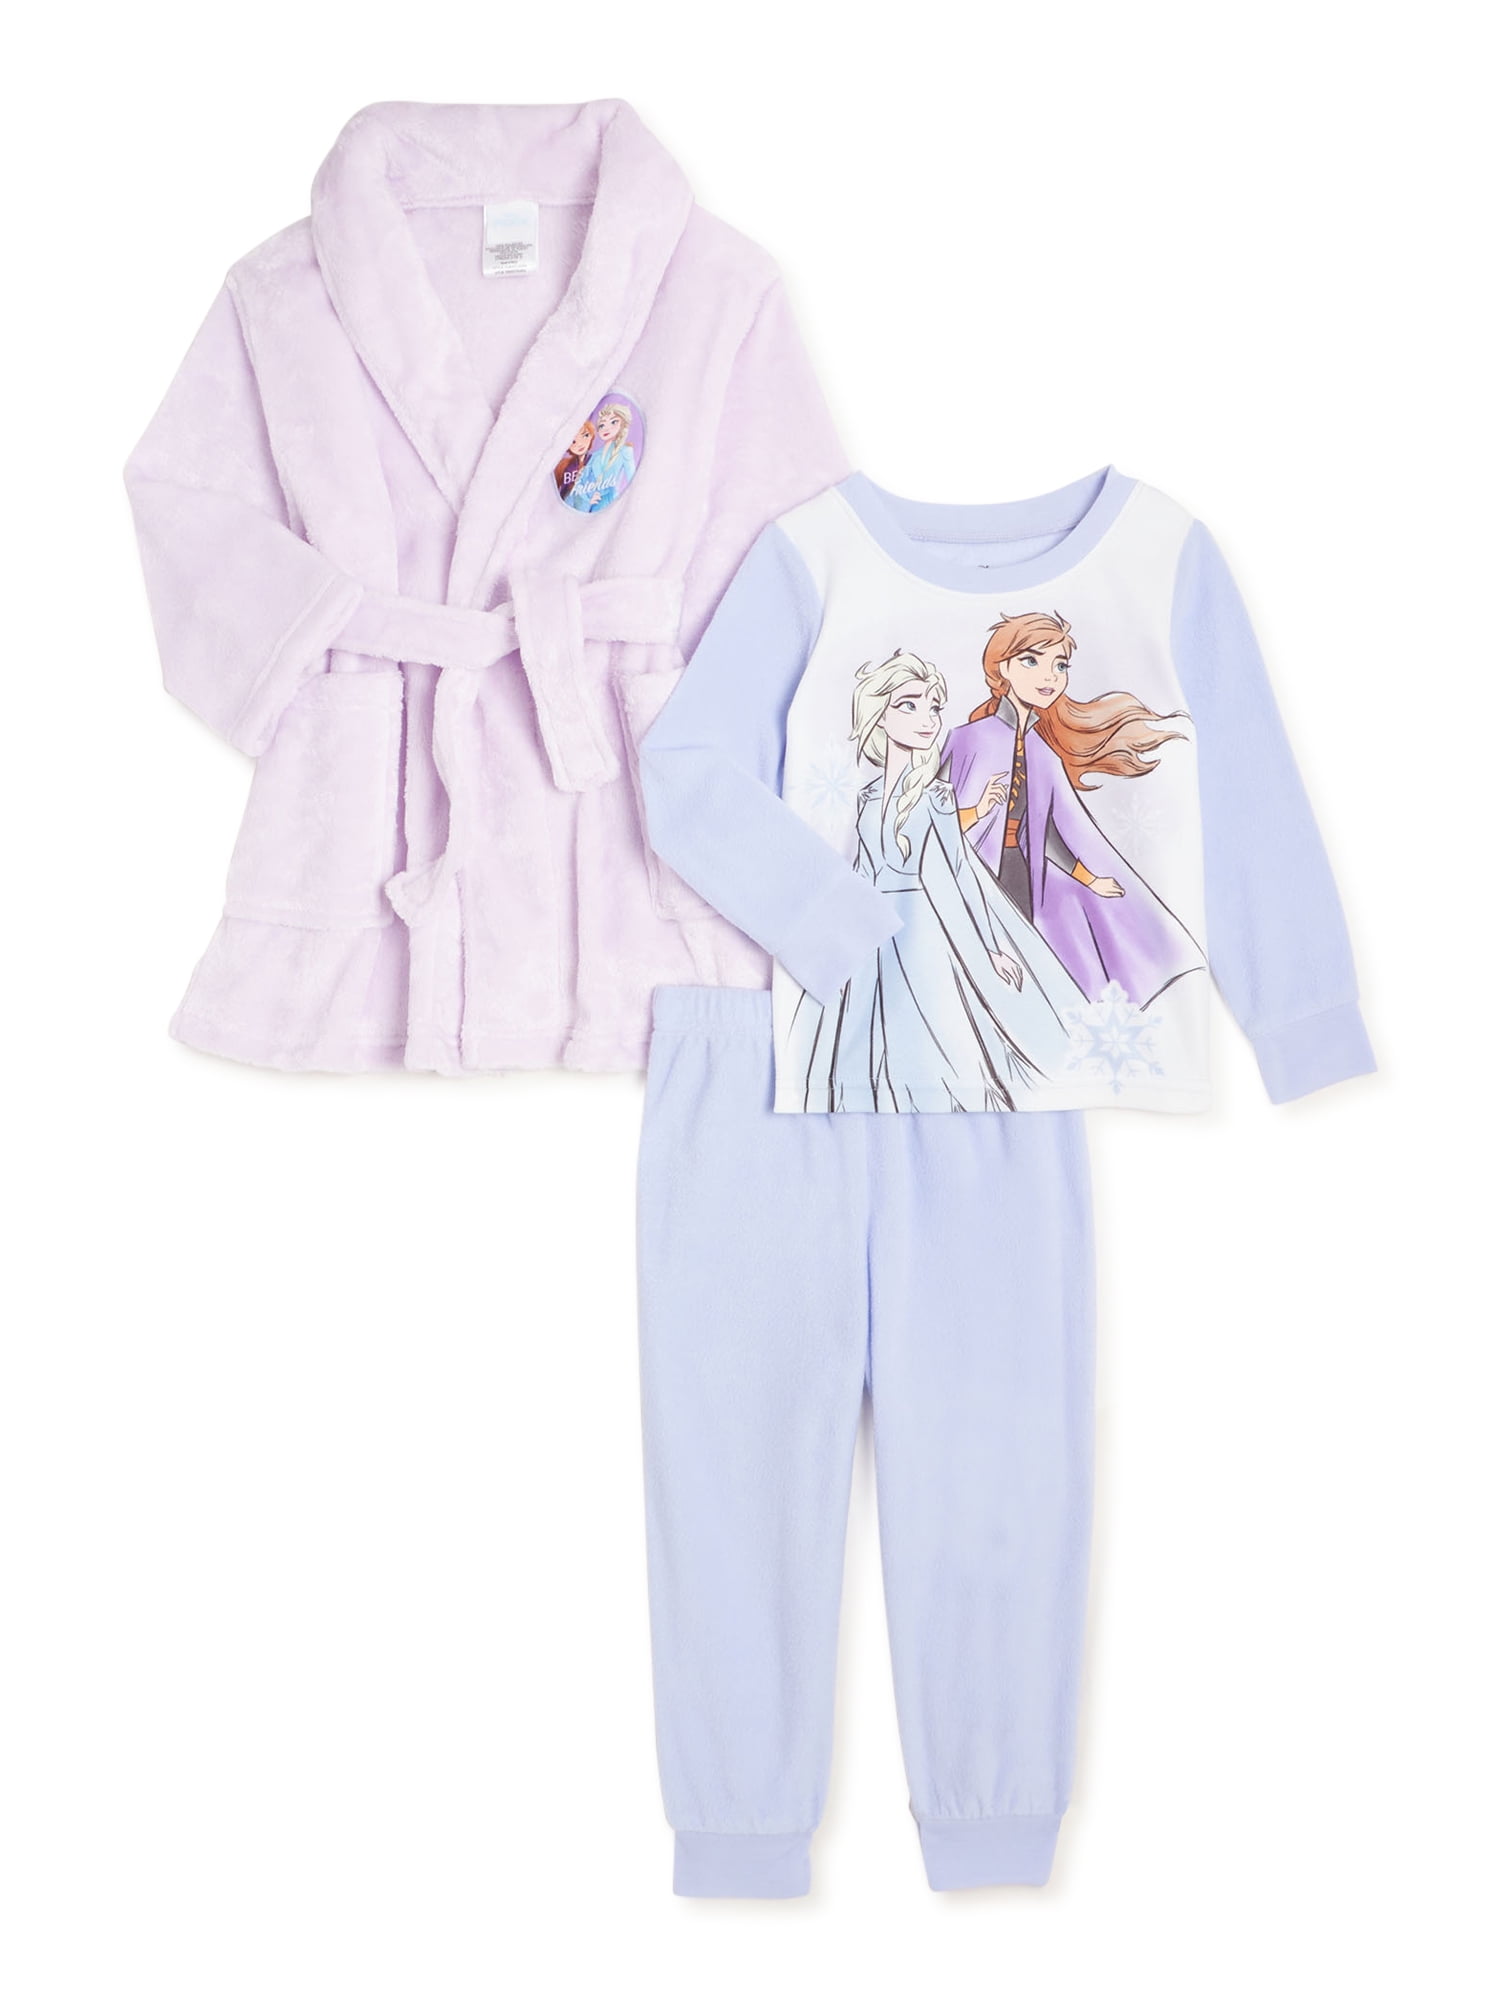 Disney FROZEN Really Cute Little Girls Set of 2 Pairs PJ's NEW in PACK 